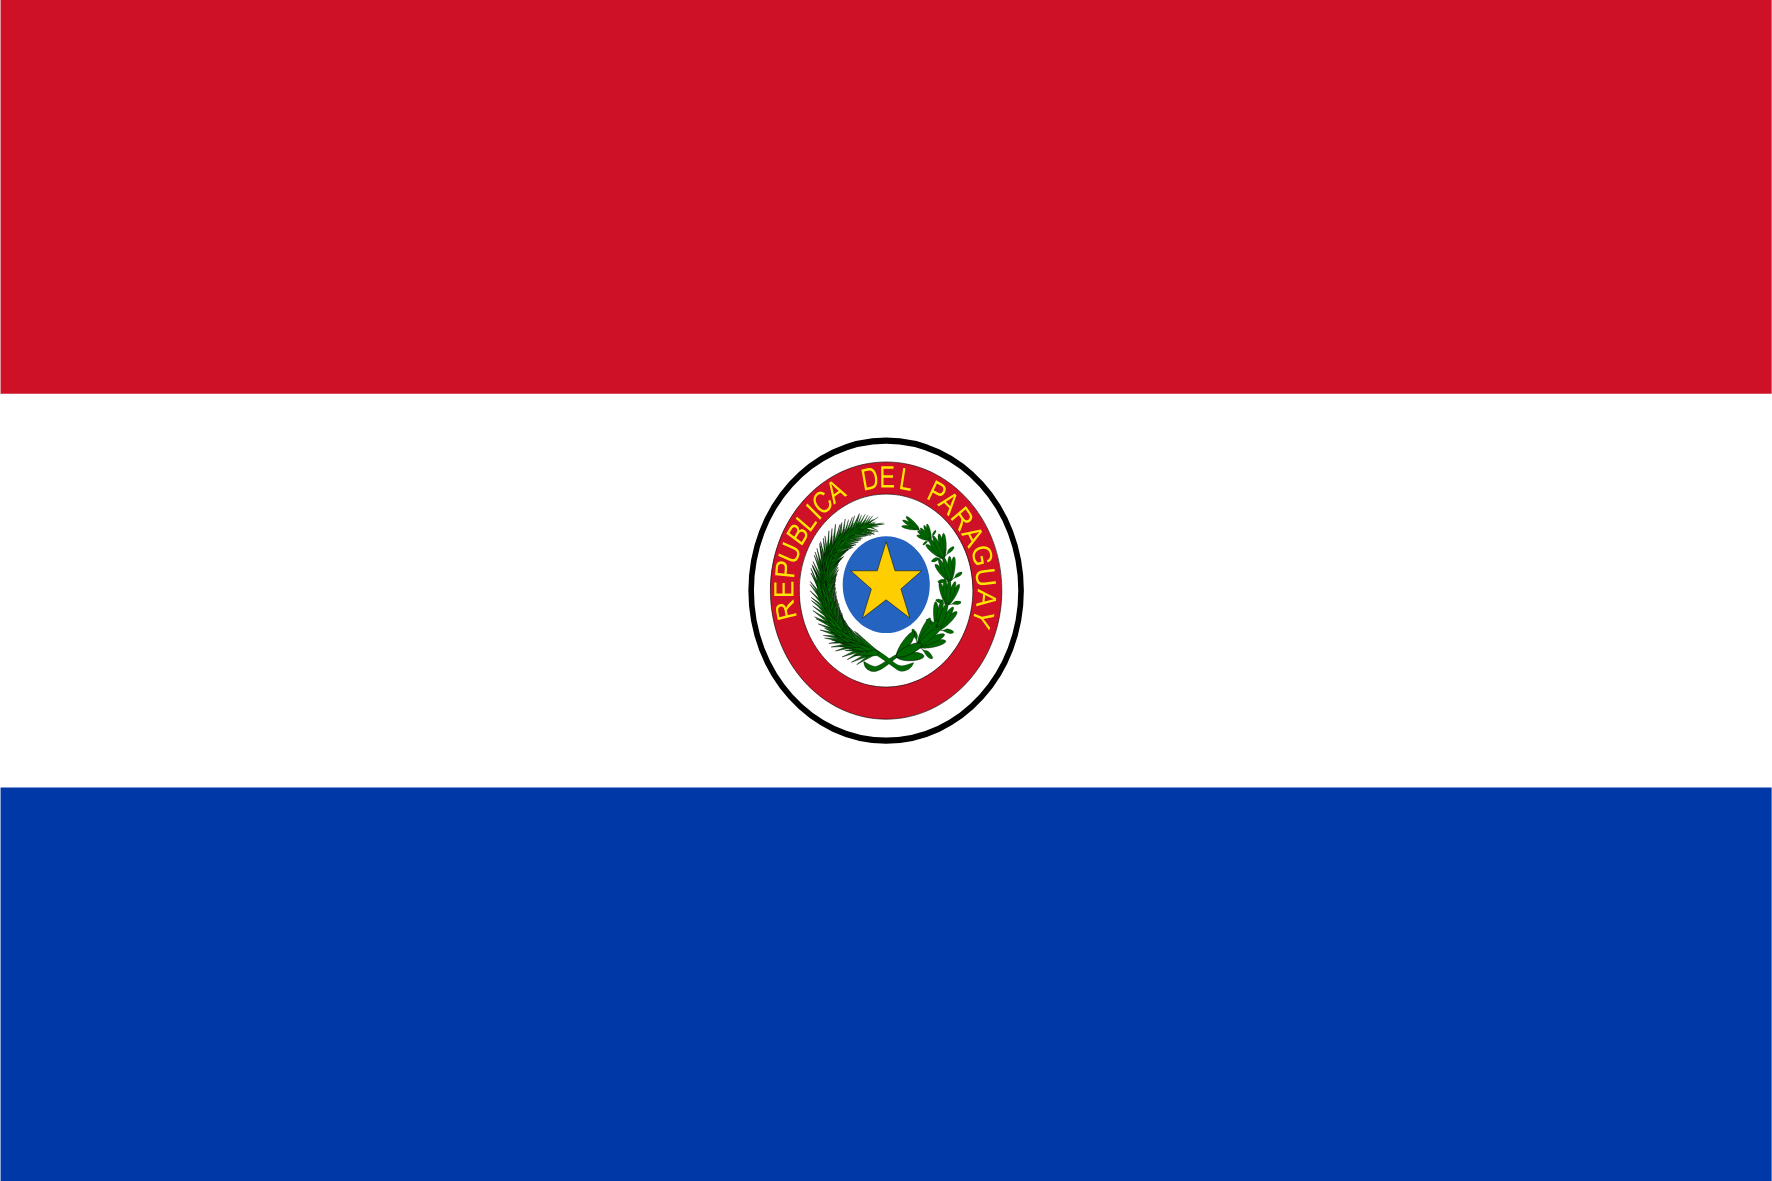 Pannello di ricerca online in Paraguay